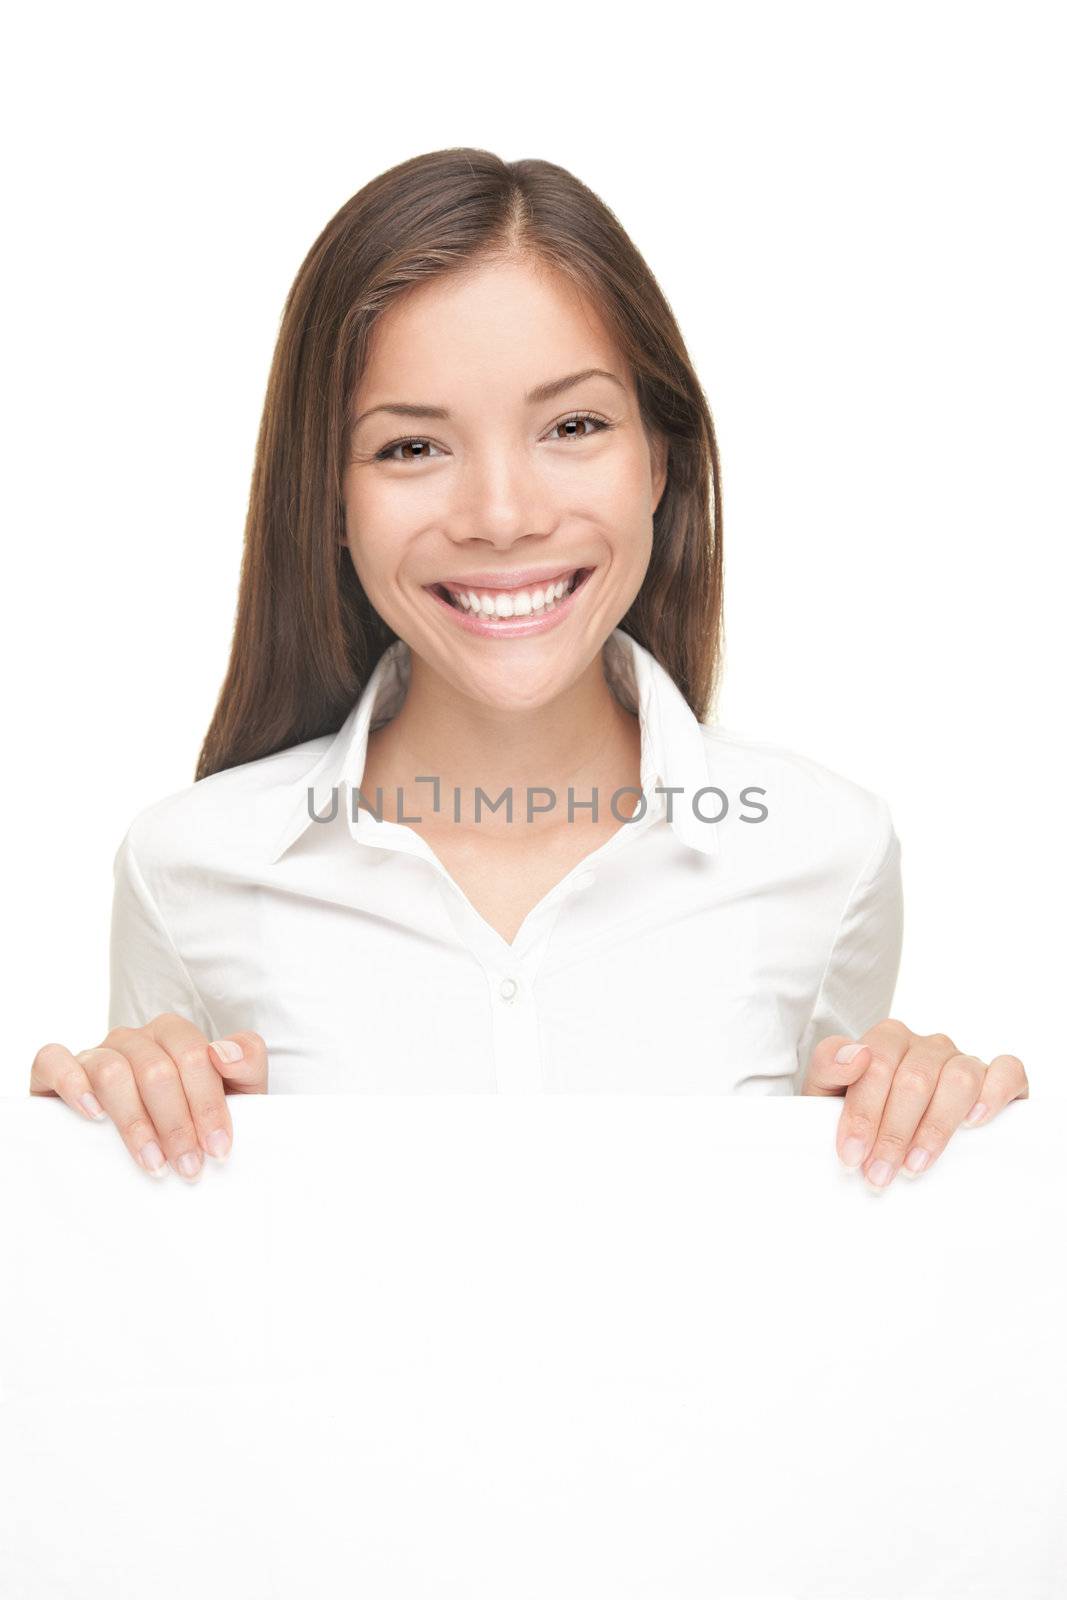 Smiling friendly young woman showing white blank sign with copyspace. Isolated on white background